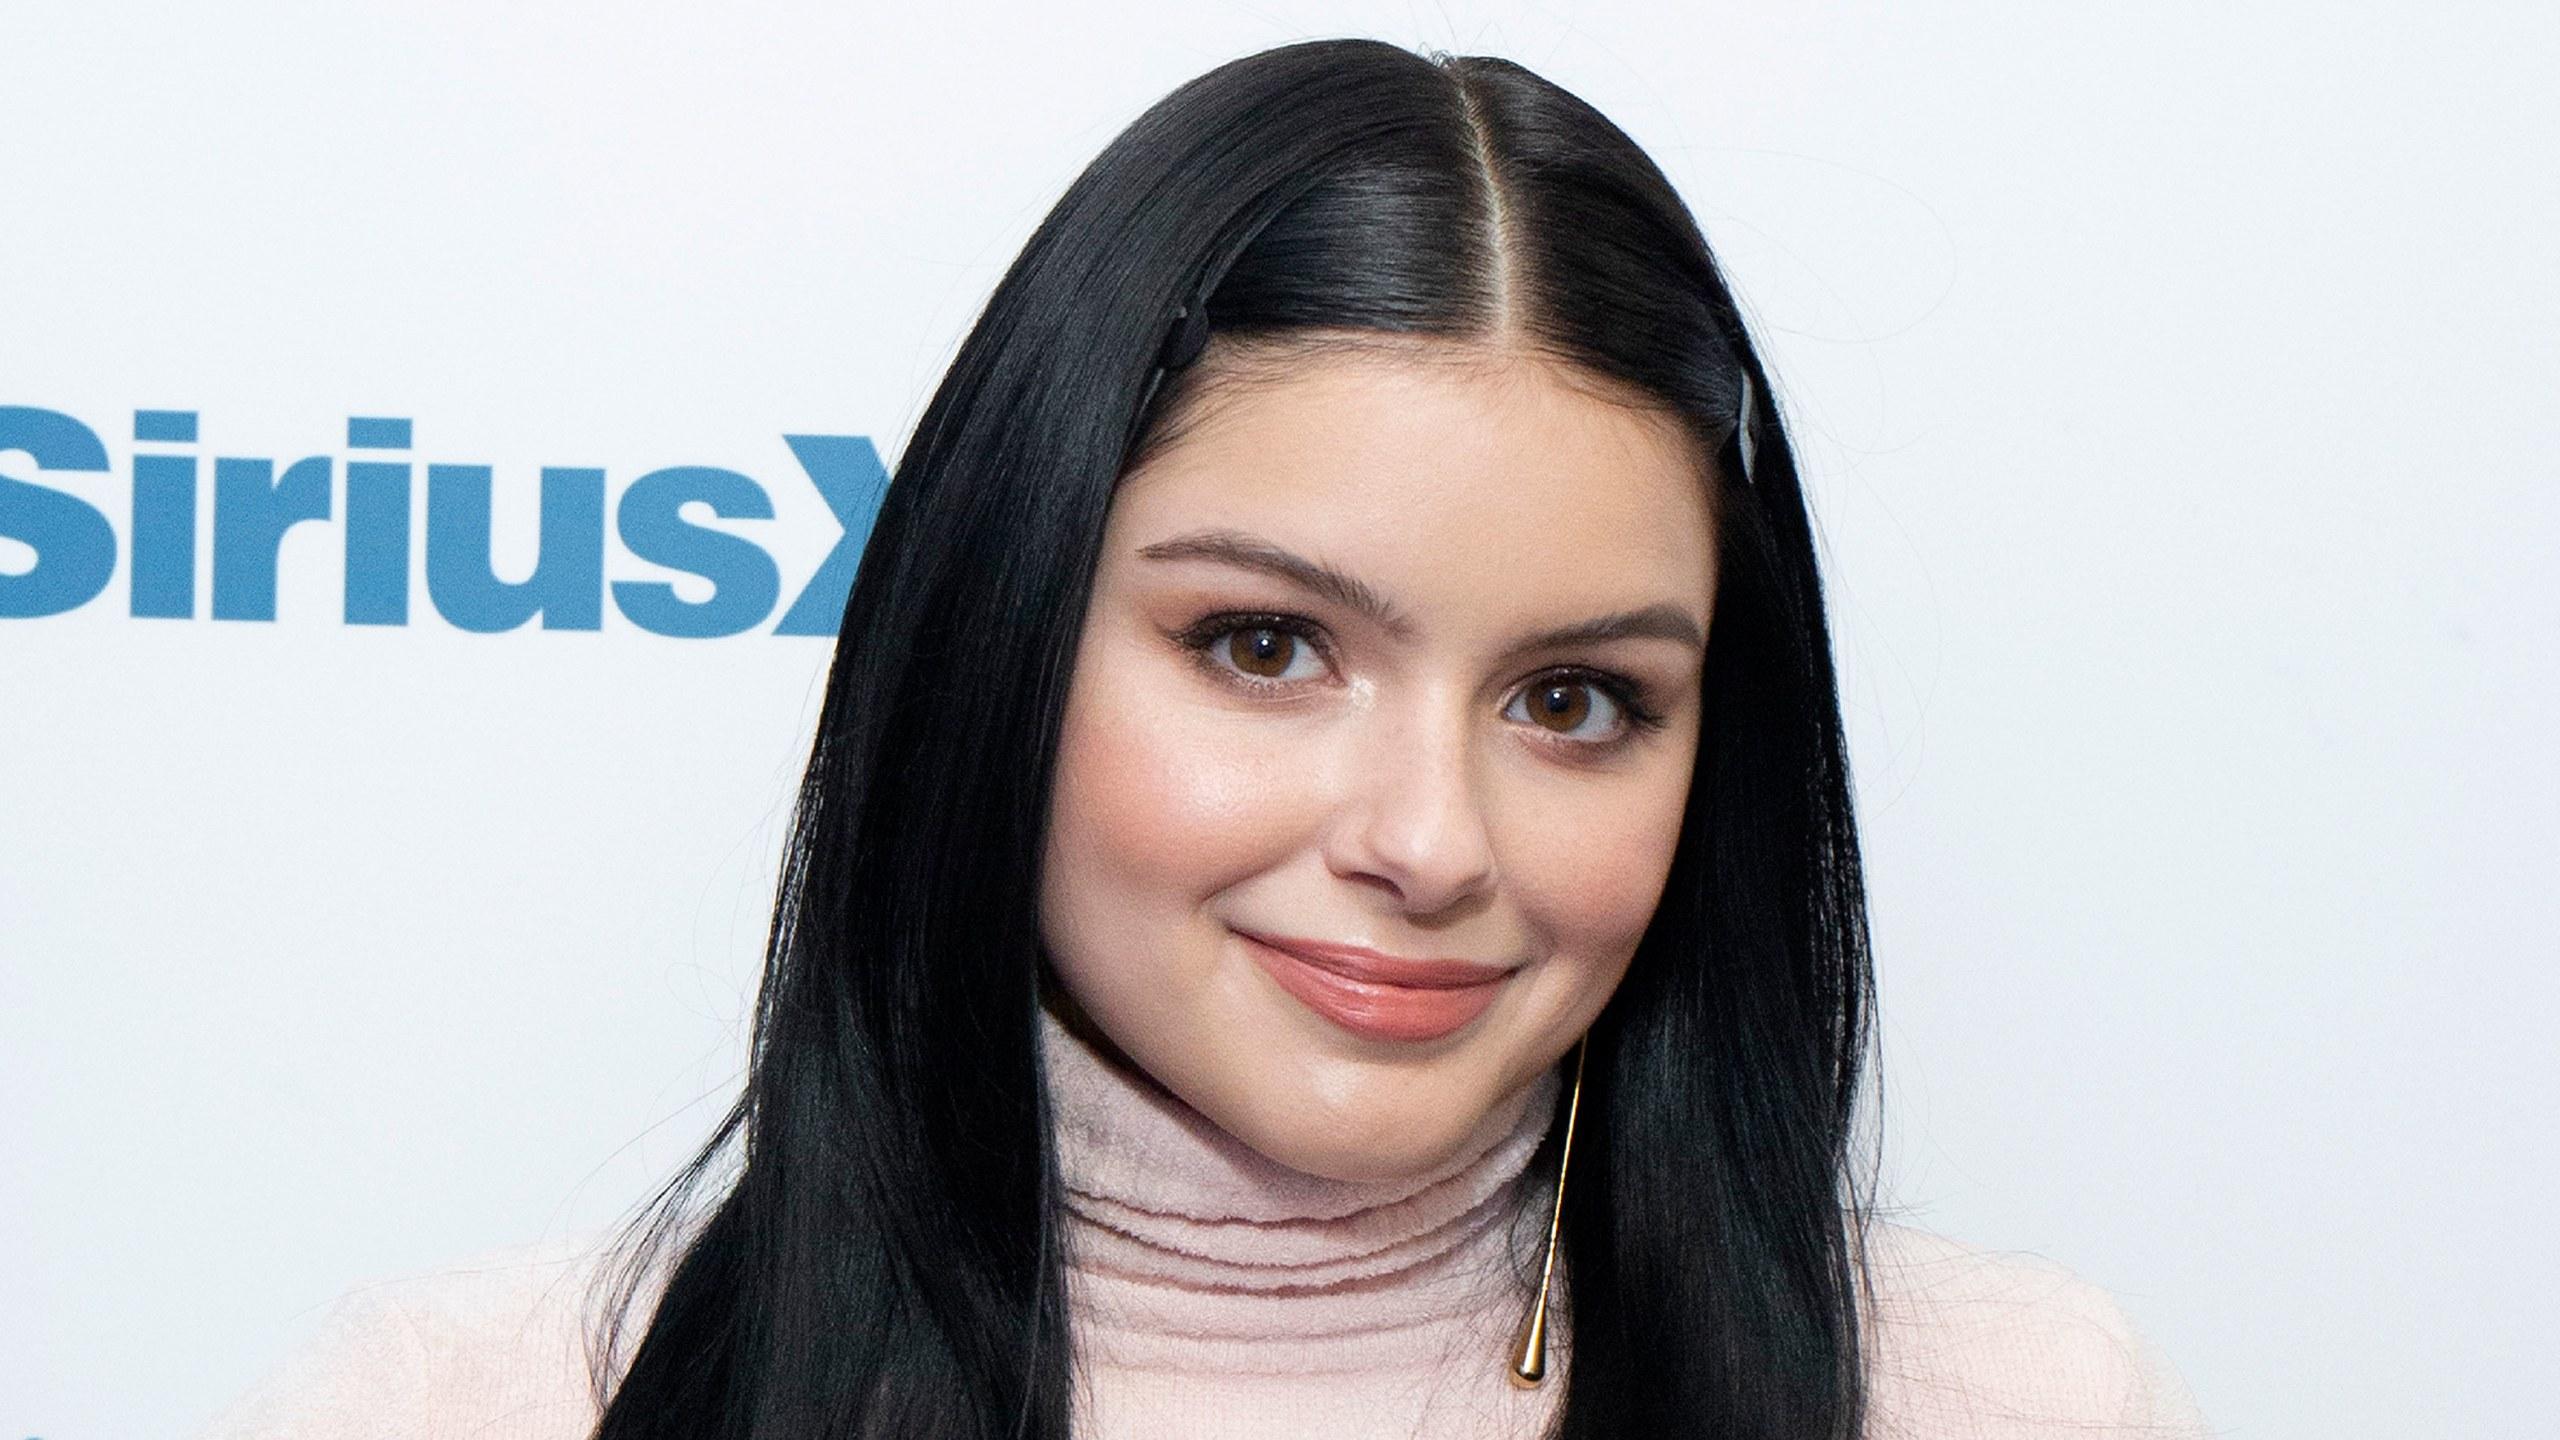 Ariel Winter Responds To Body Shaming Comments On Instagram